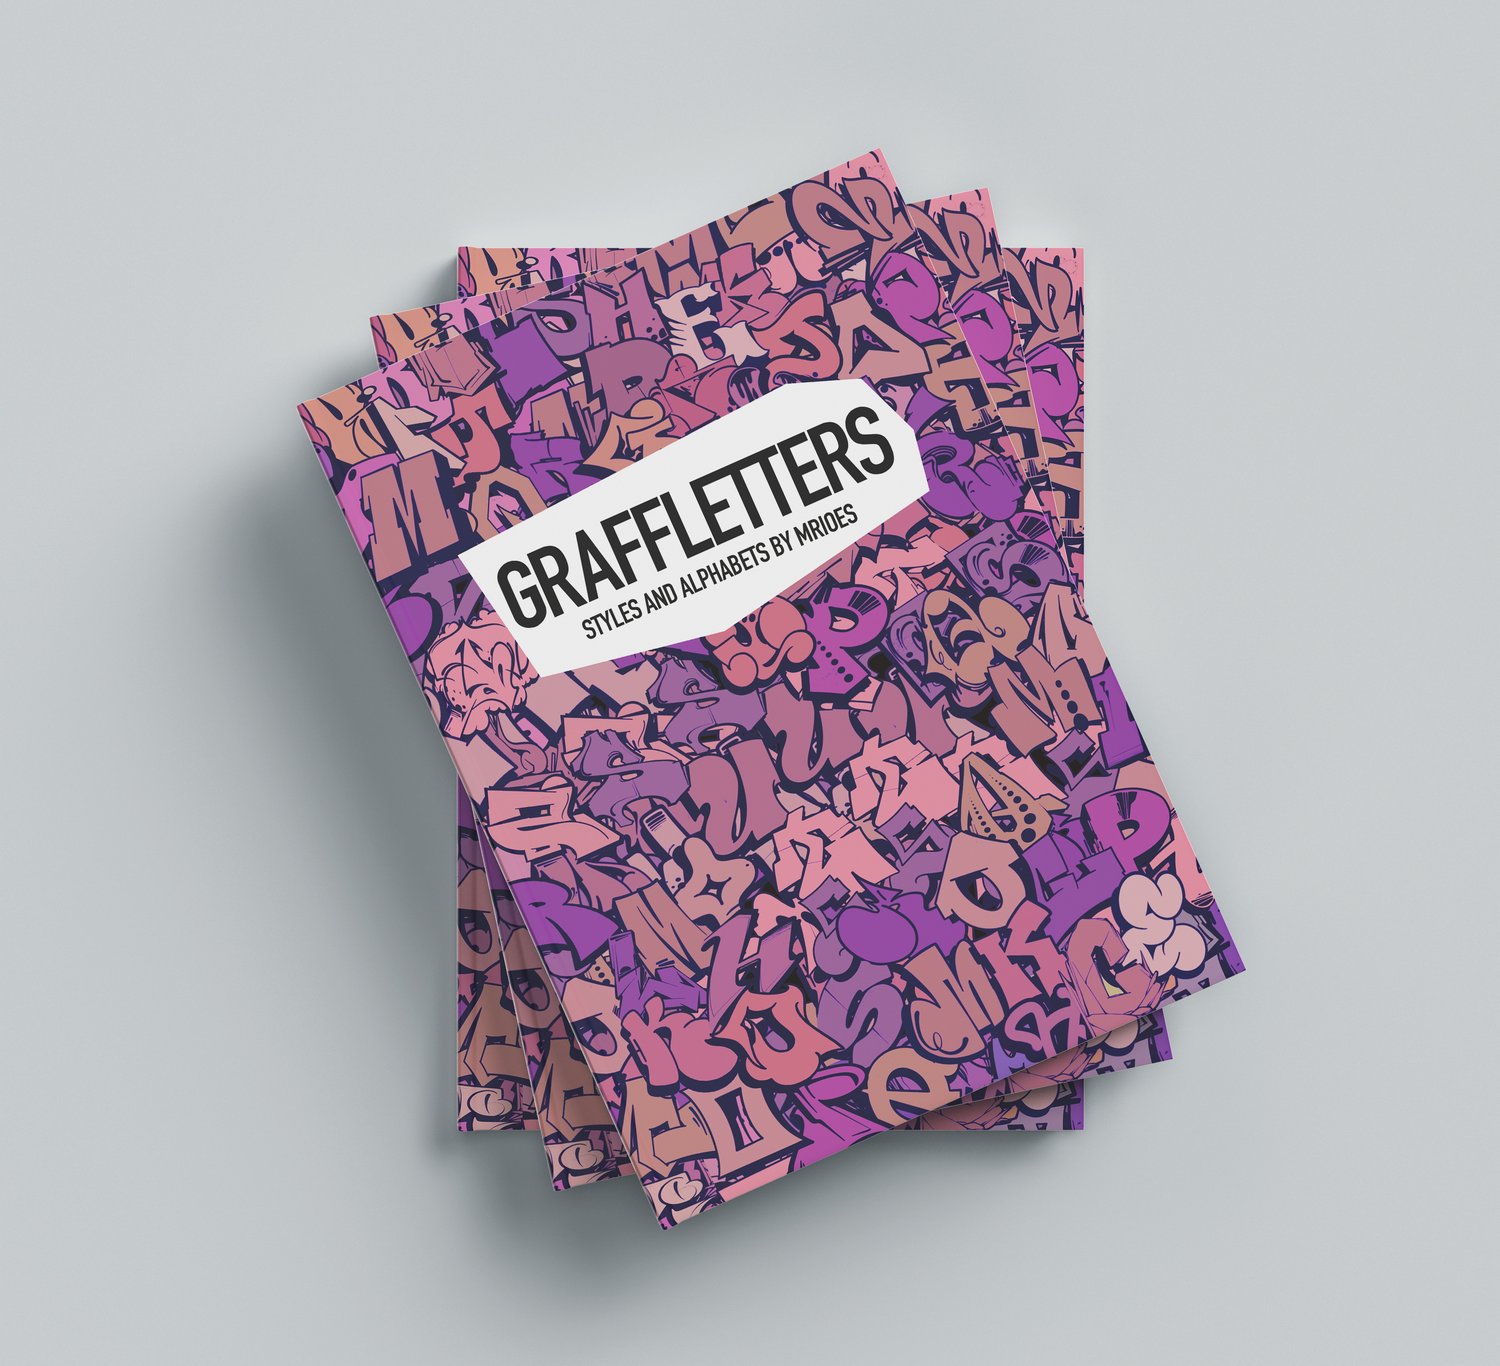 GRAFFLETTERS - COLLECTOR EDITION